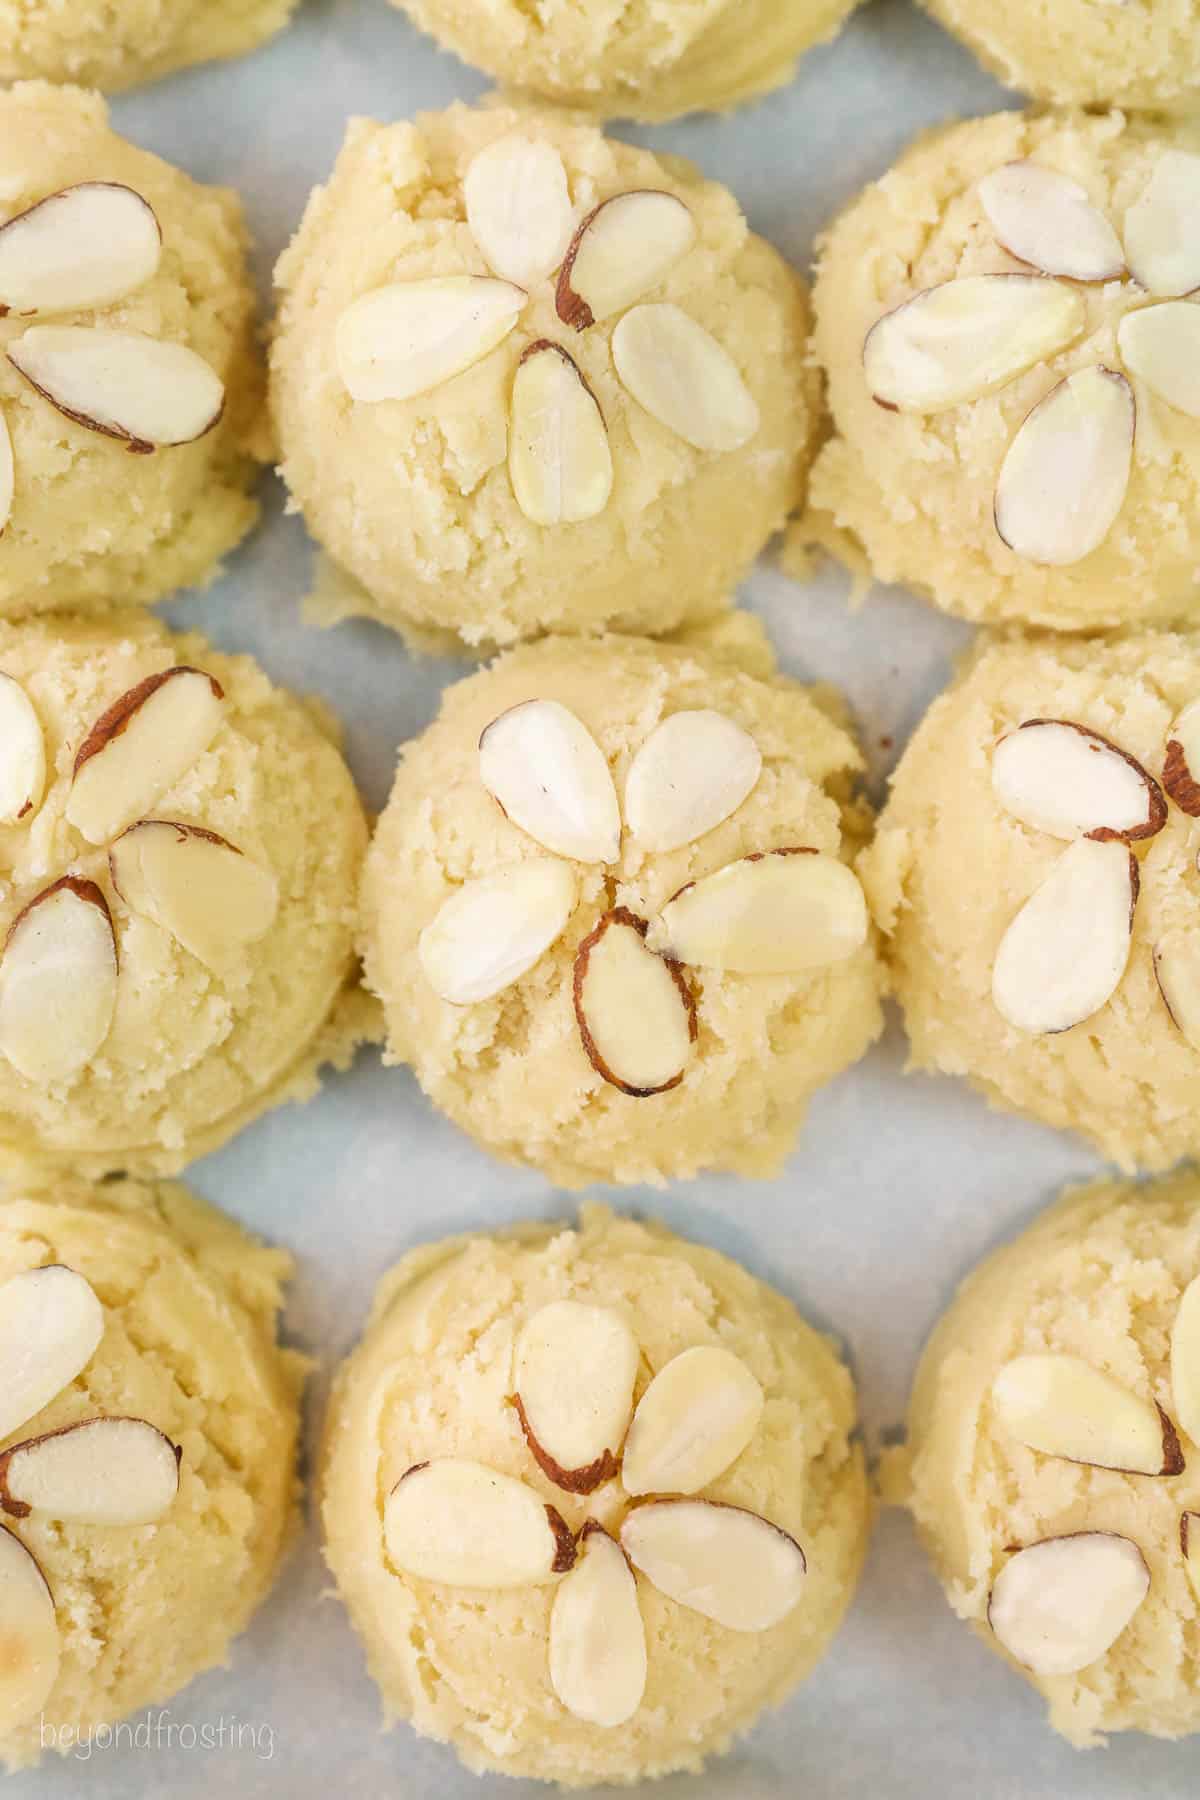 Almond cookie dough balls in rows on a baking sheet, topped with slivered almonds.